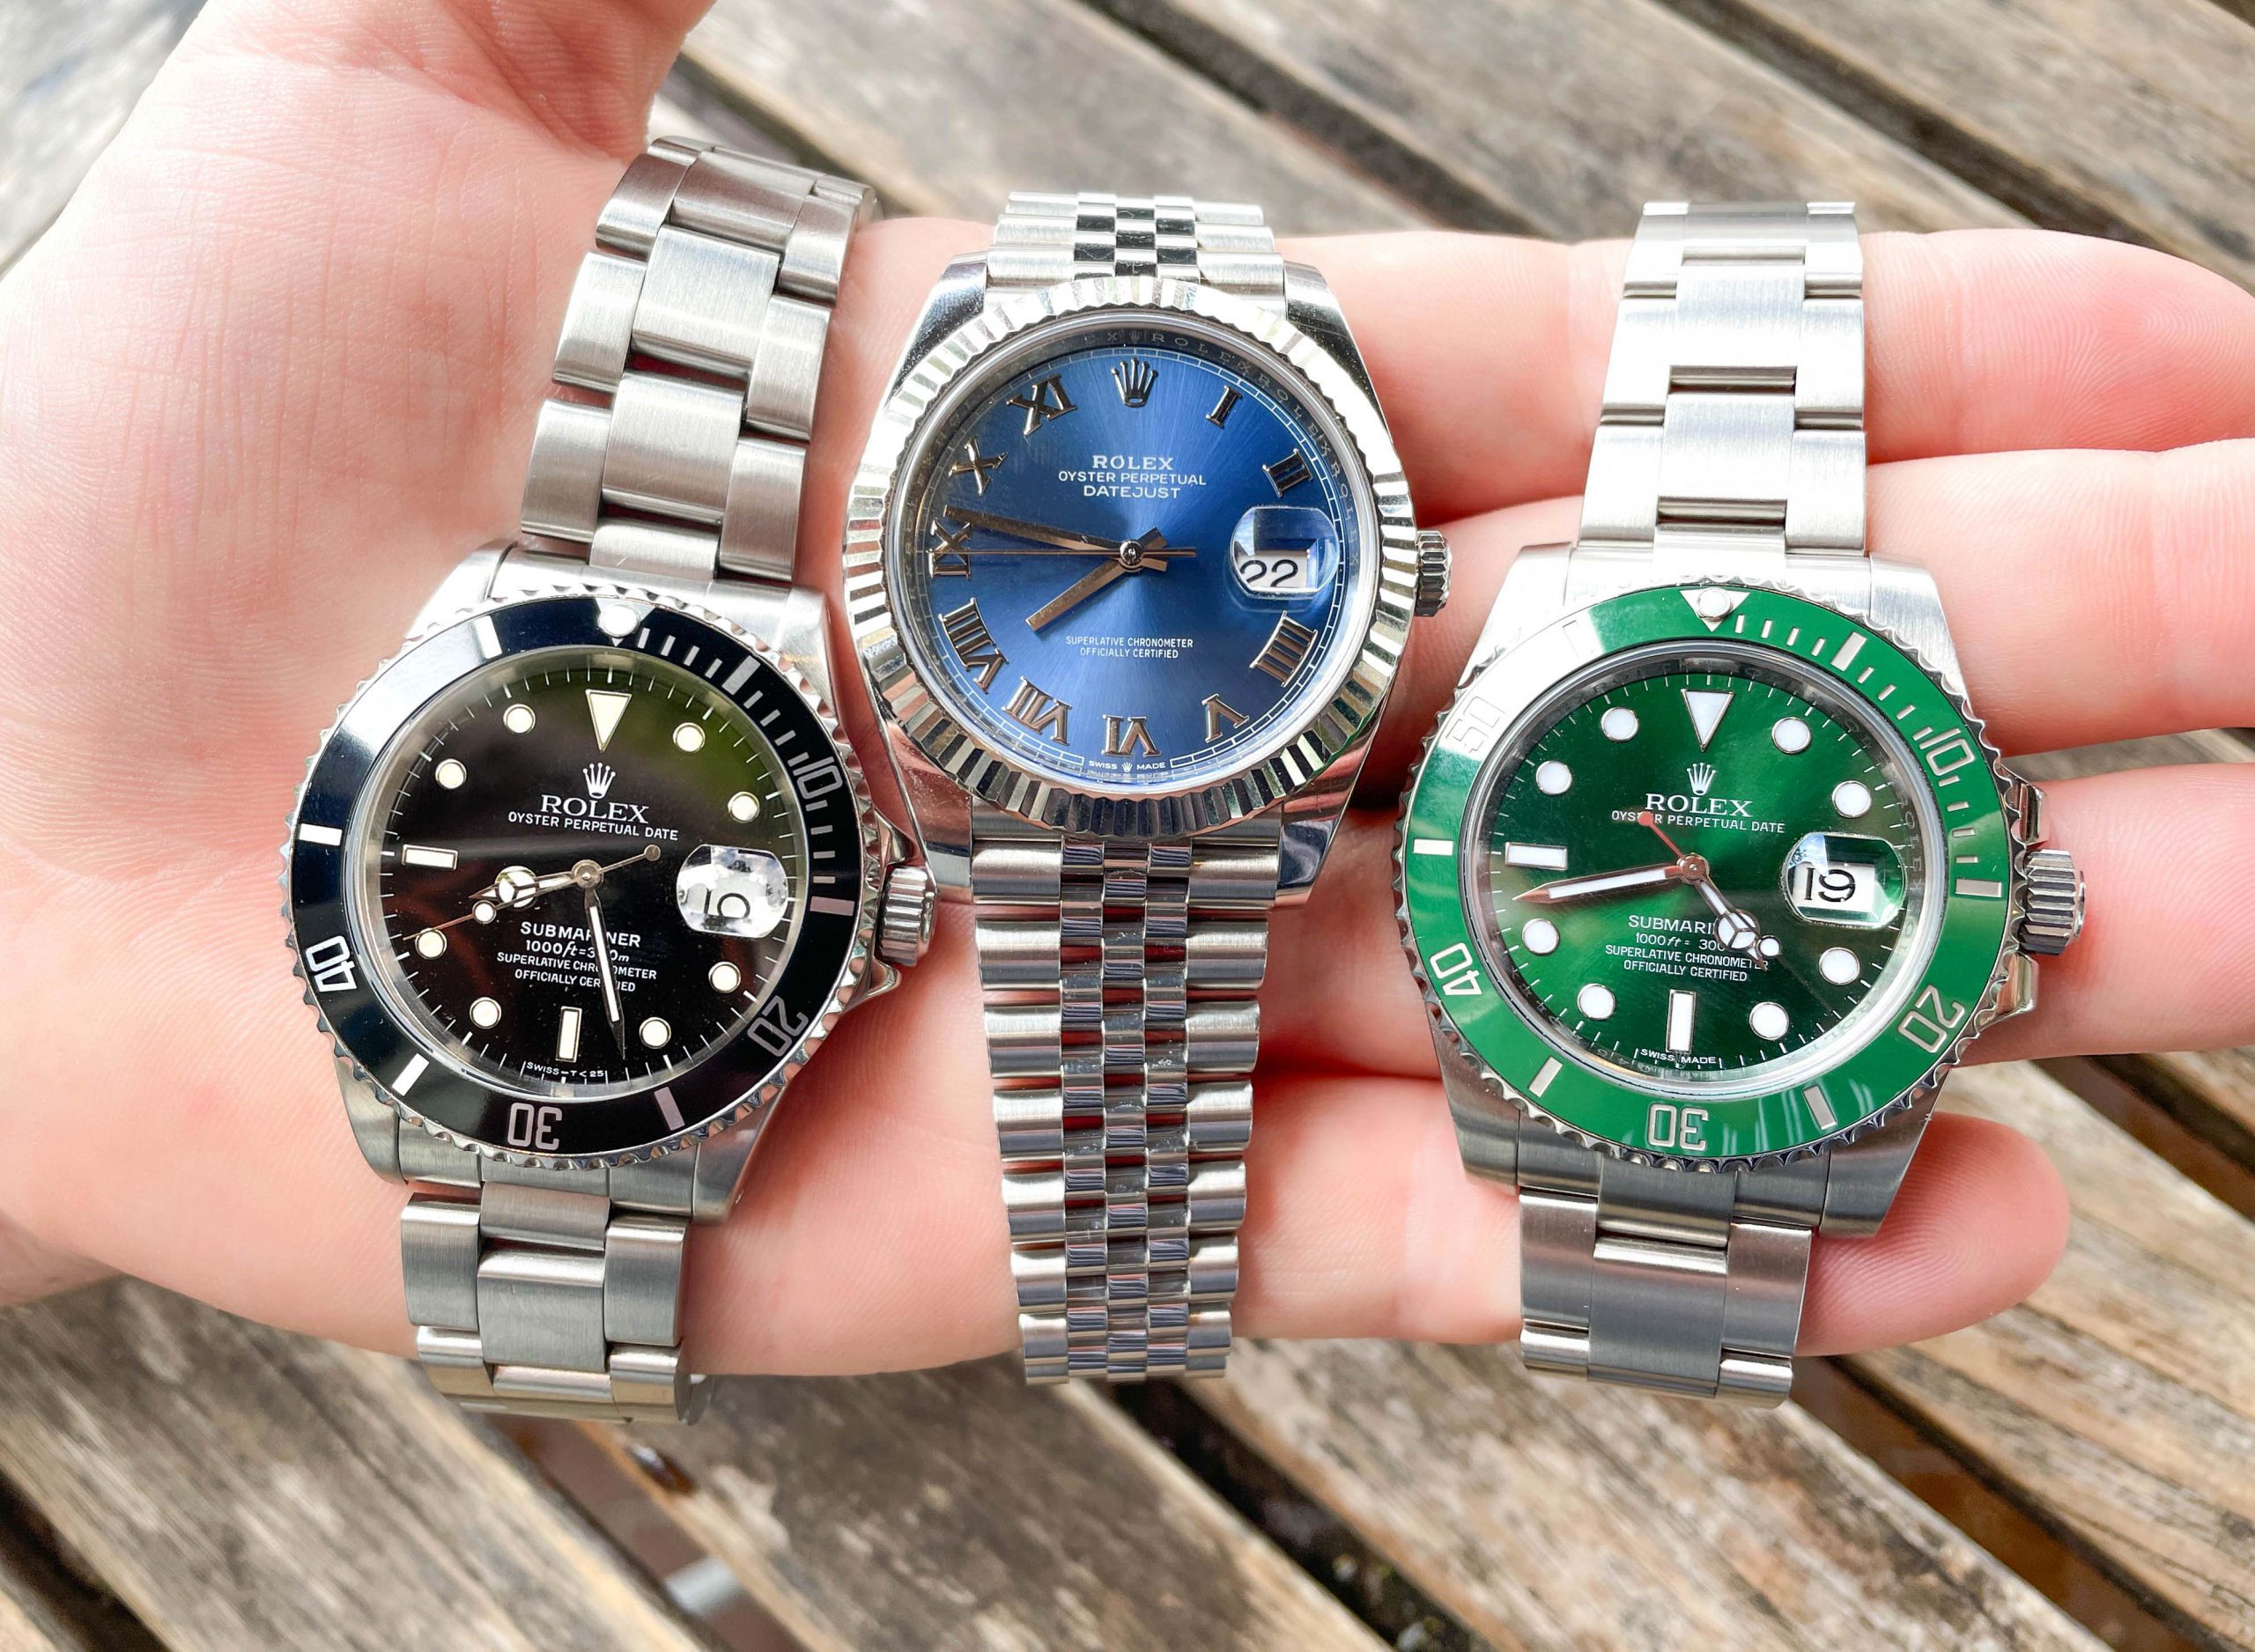 Three Rolex Watches across palm of hand